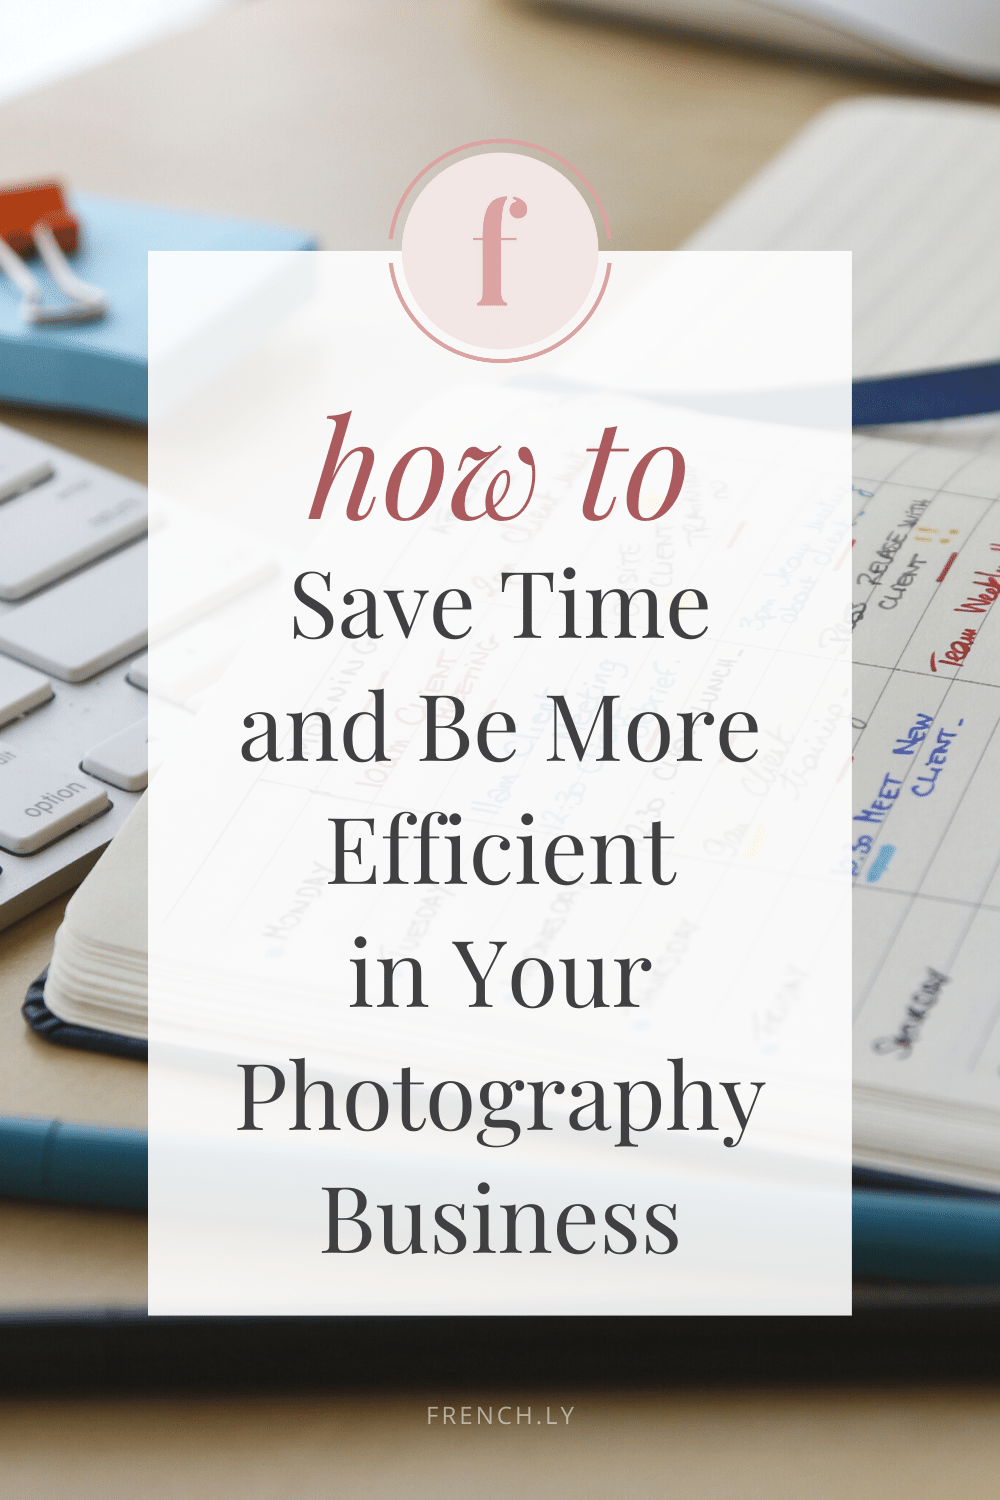 How to Save Time and Be More Efficient in Your Photography Business | Frenchly Food + Product Photography